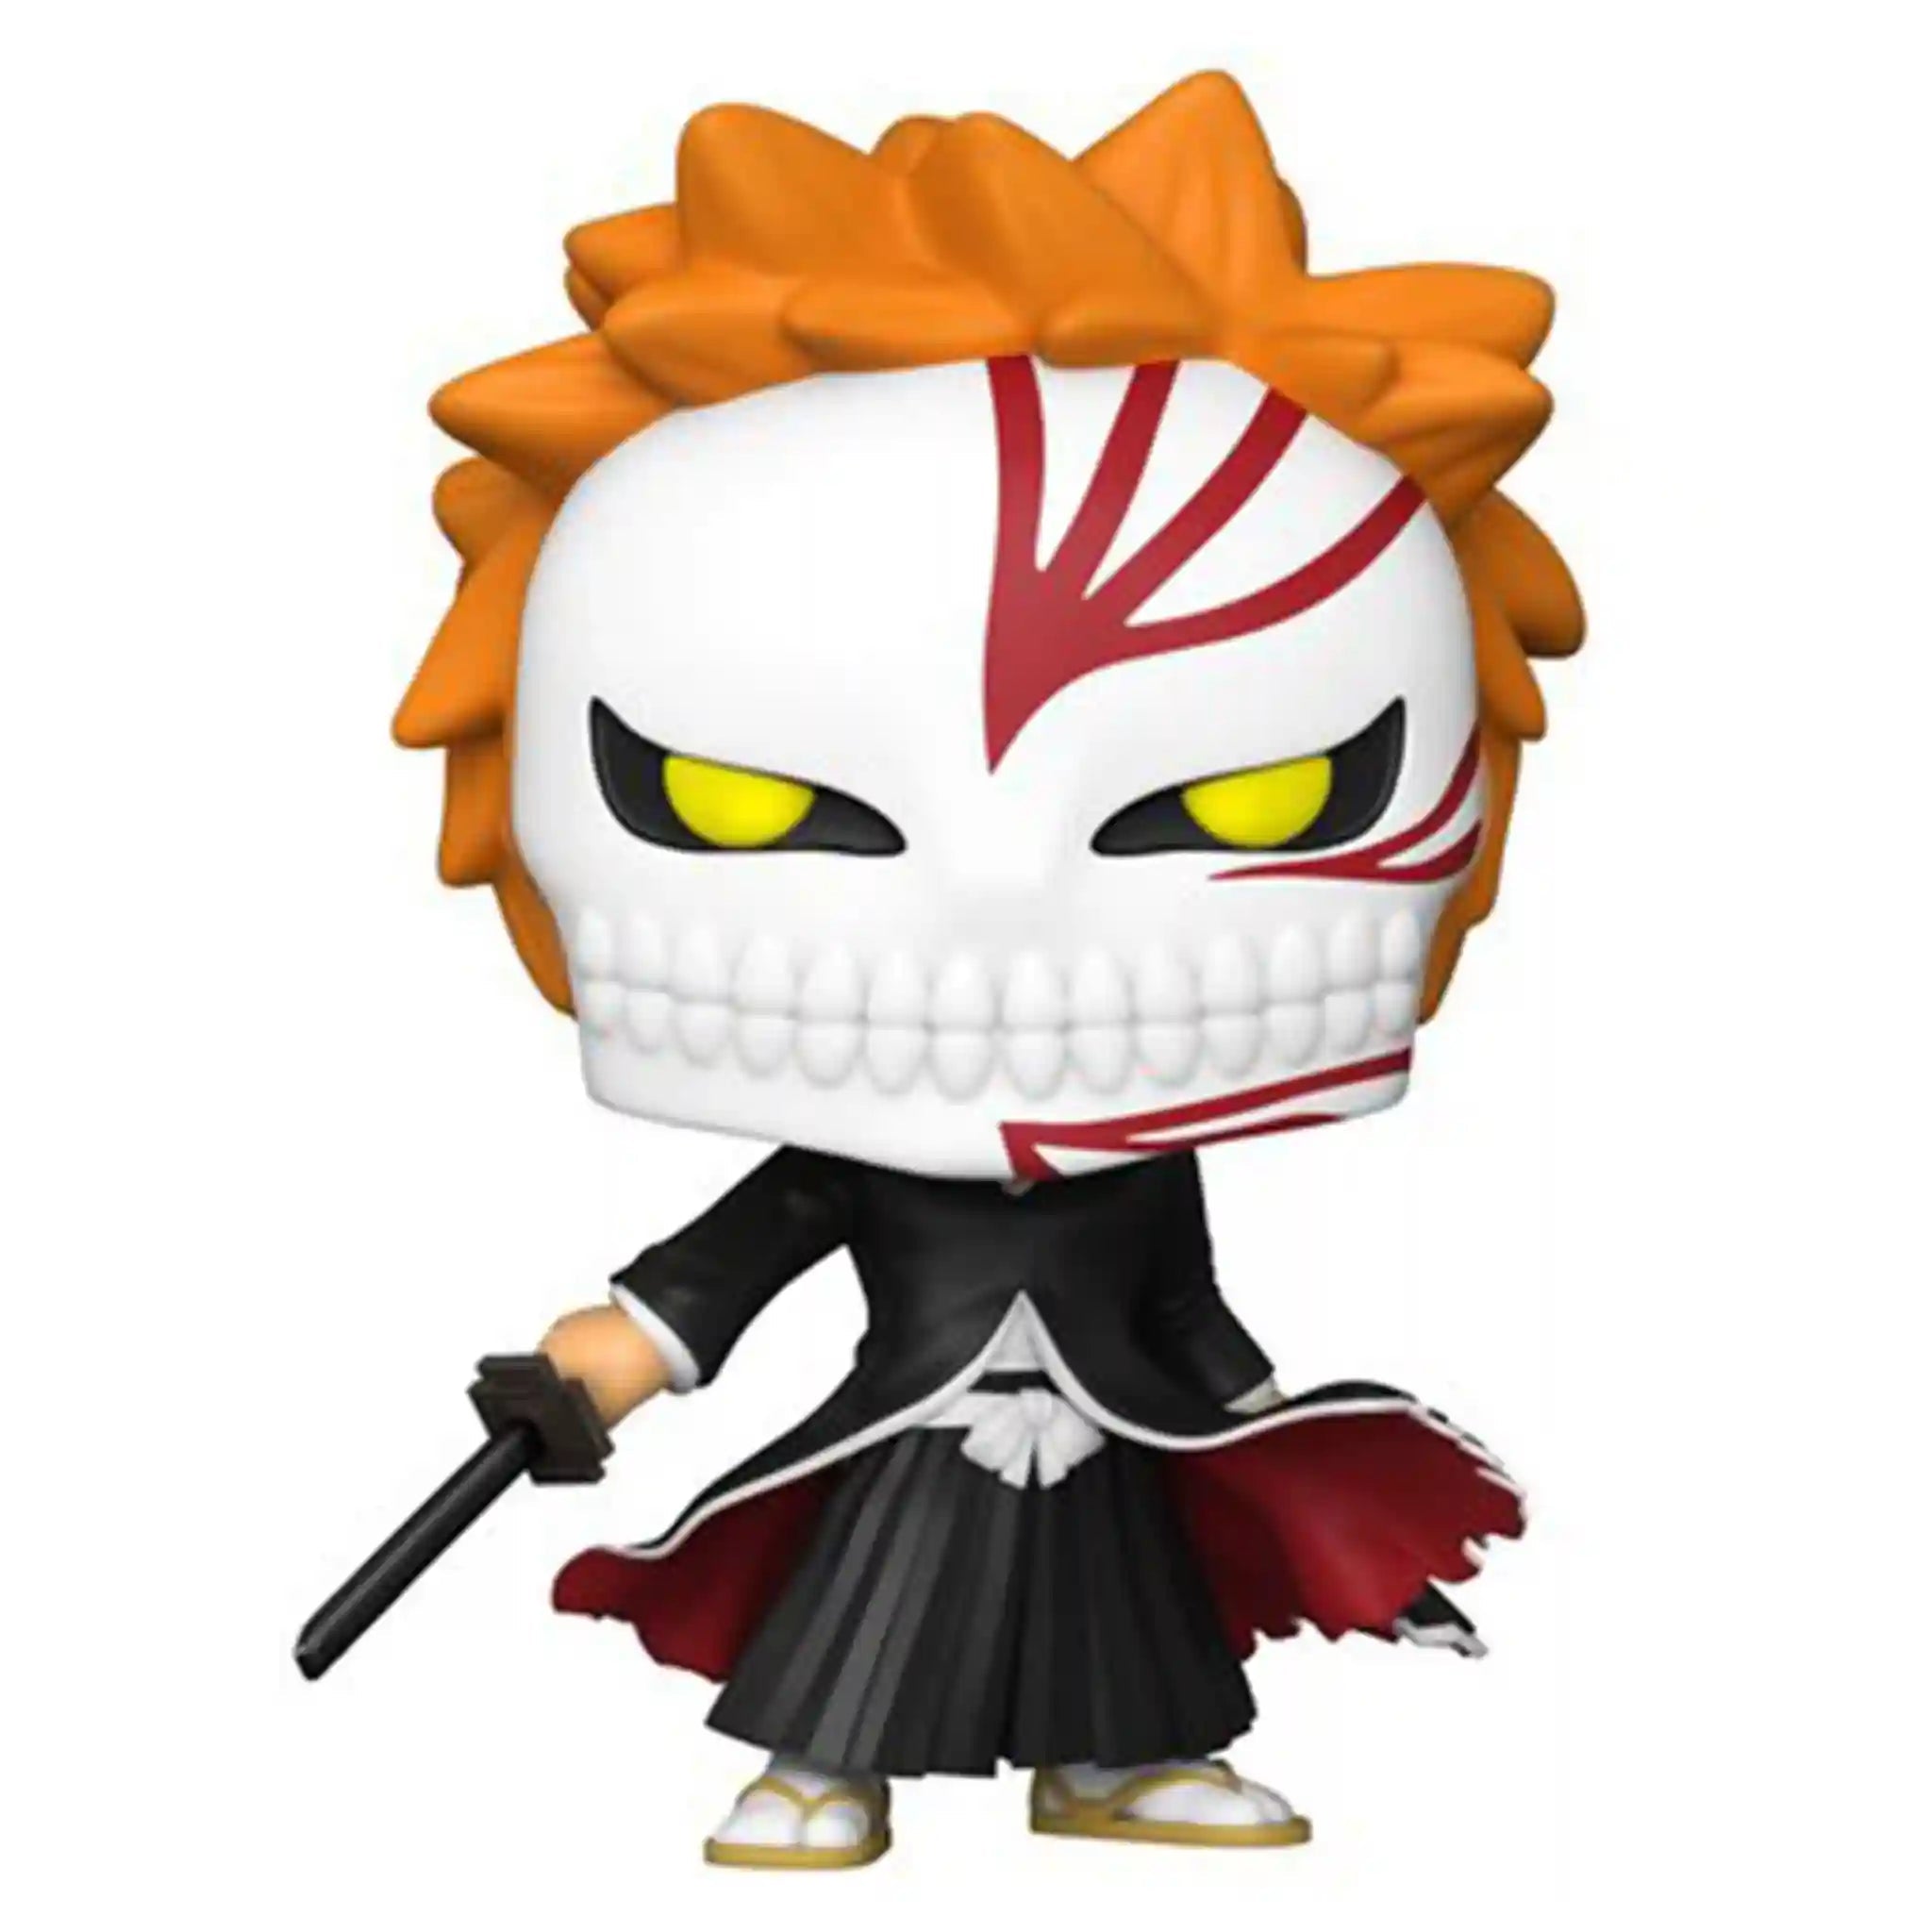 Ichigo Funko Pop! CHASE SPECIAL EDITION (Signed by Johnny Yong Bosch)